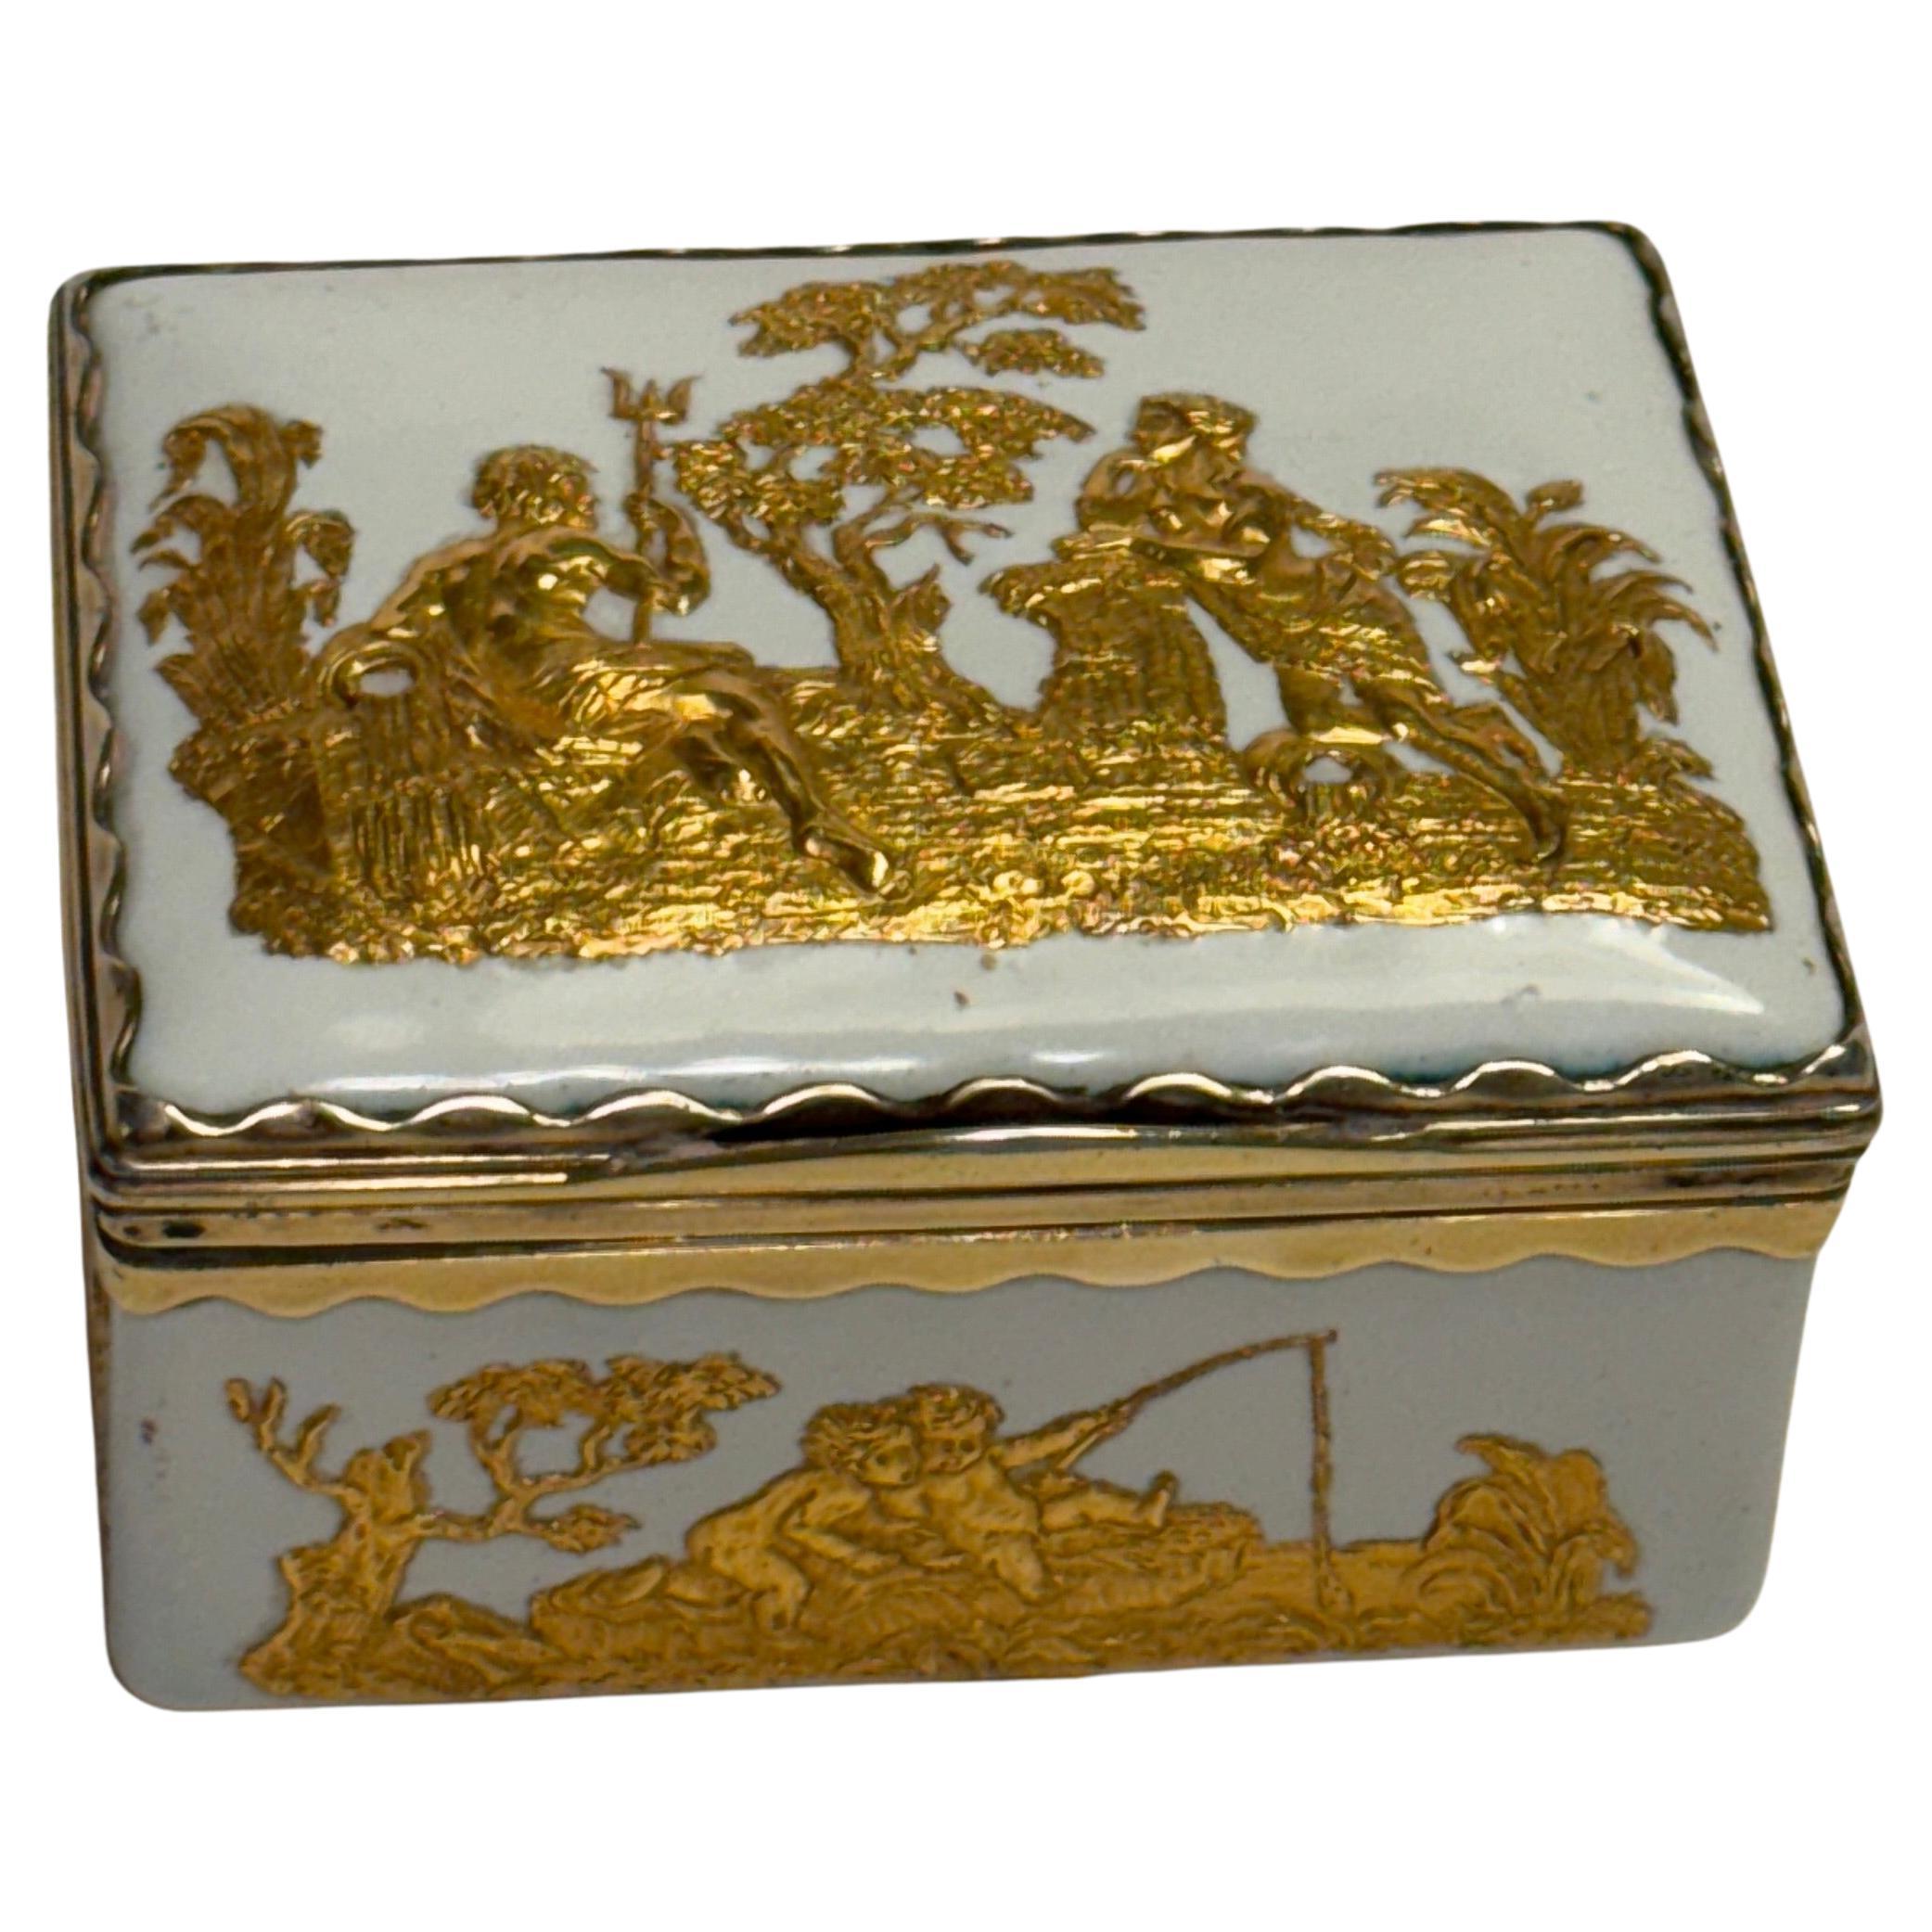 18th Century Porcelain Snuff Tobacco Box with Ormulu Gilt Decorations